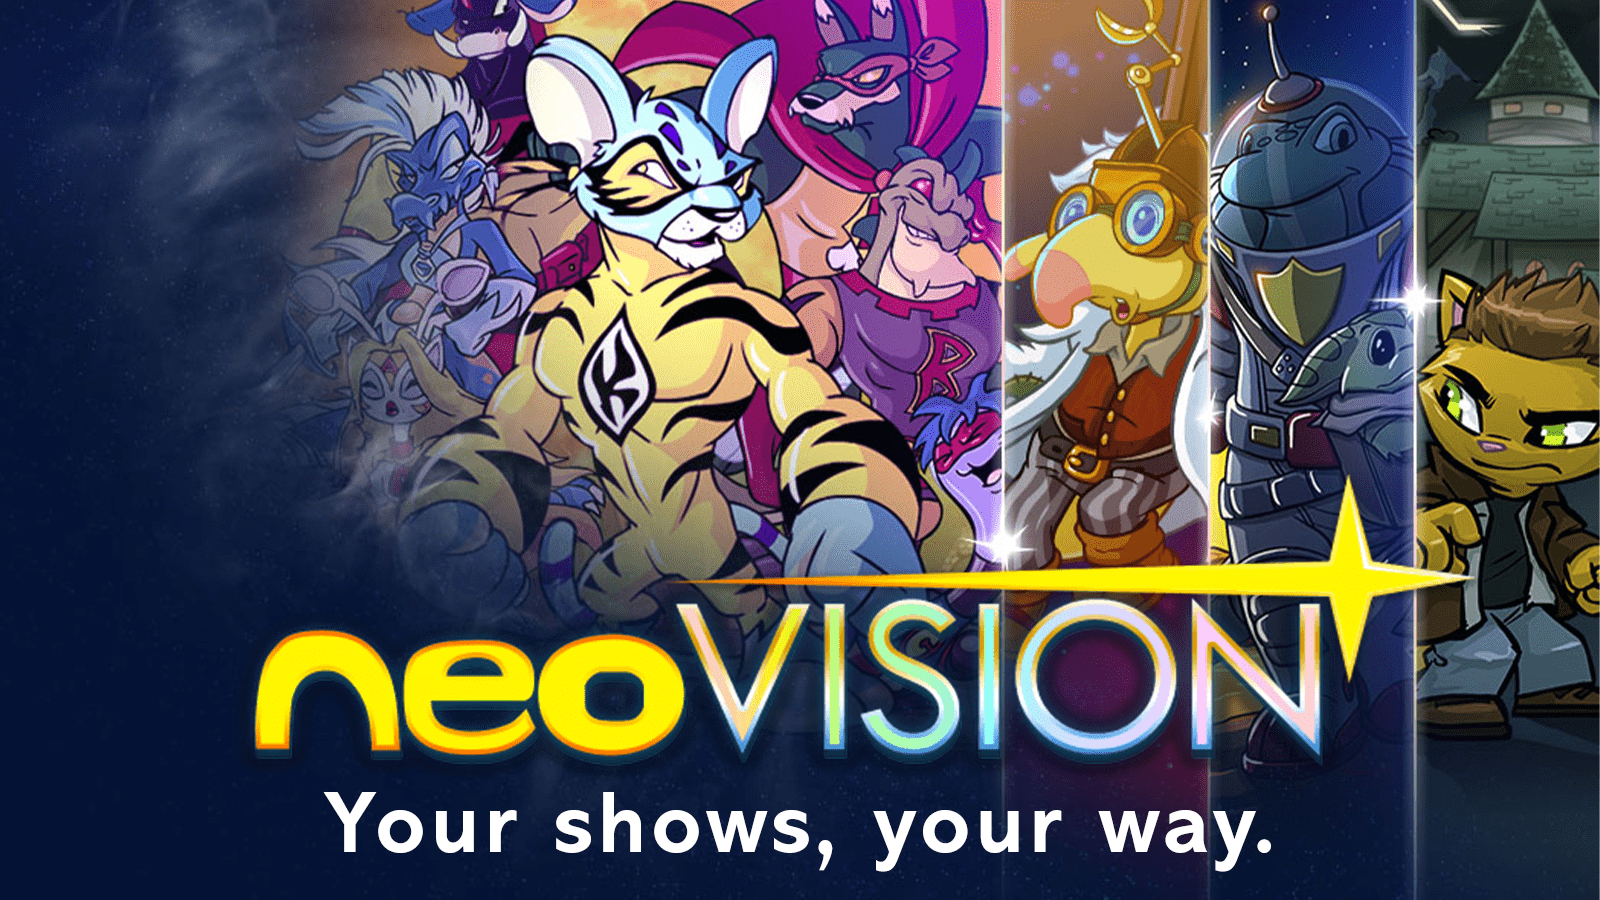 https://images.neopets.com/homepage/marquee/neovision_billboard.png